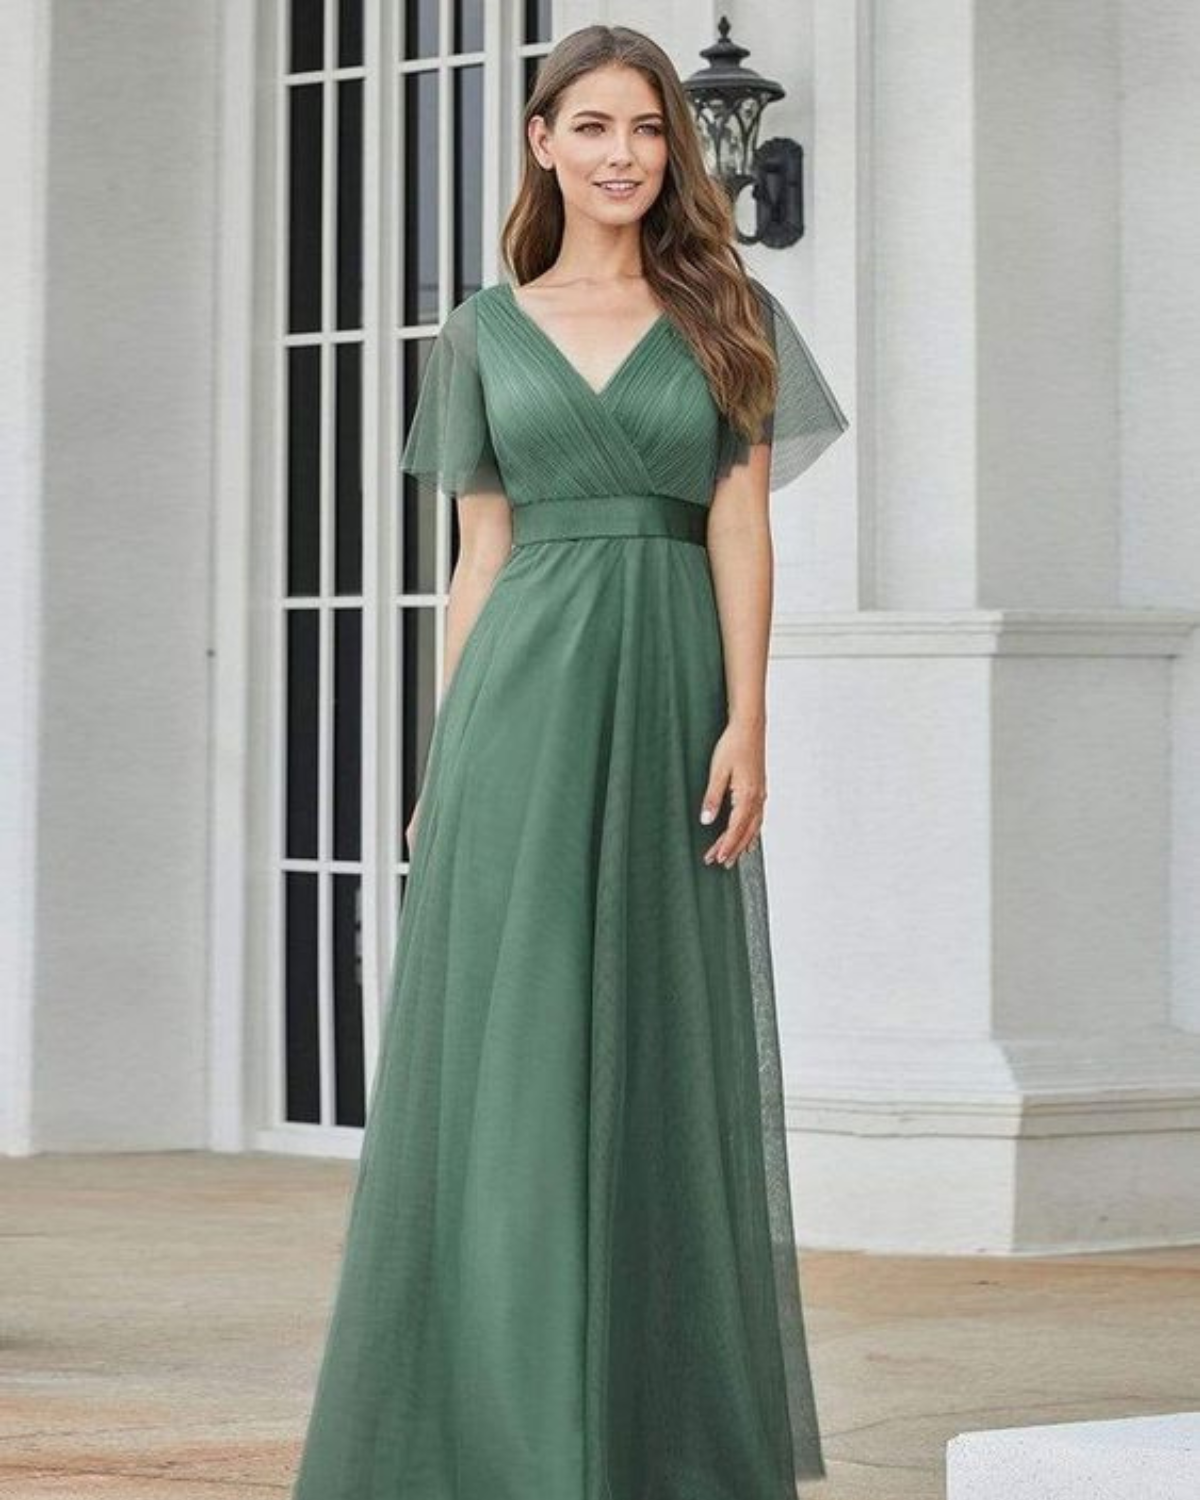 Dress to Impress: Explore Our Top Picks for Bridesmaid Attire#N# |#N ...